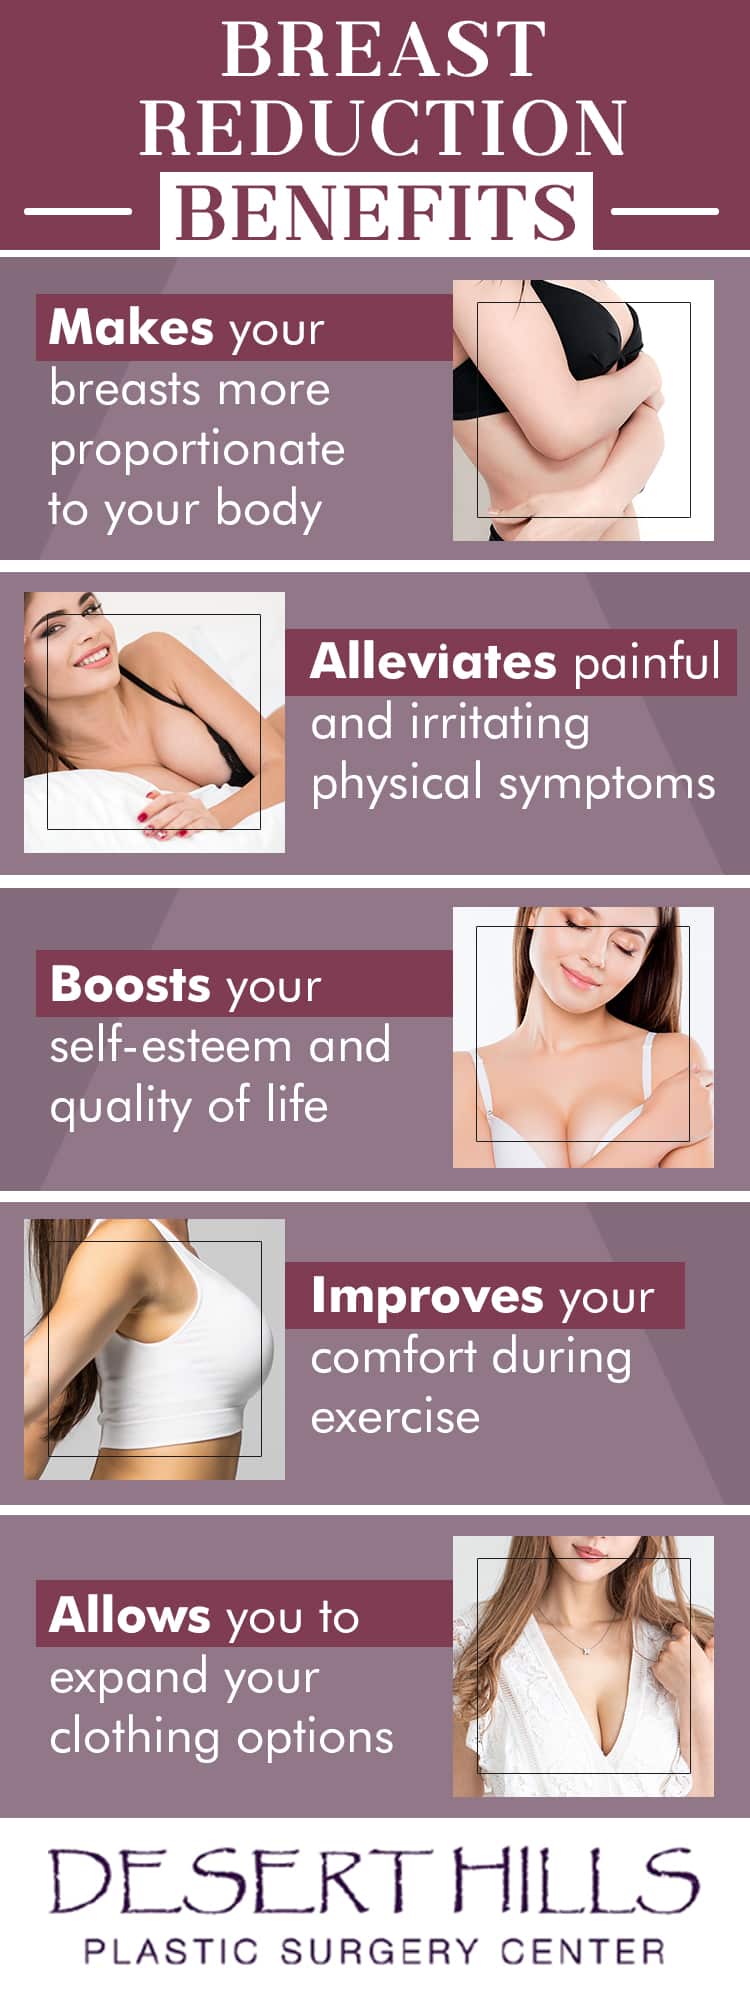 Breast reduction benefits